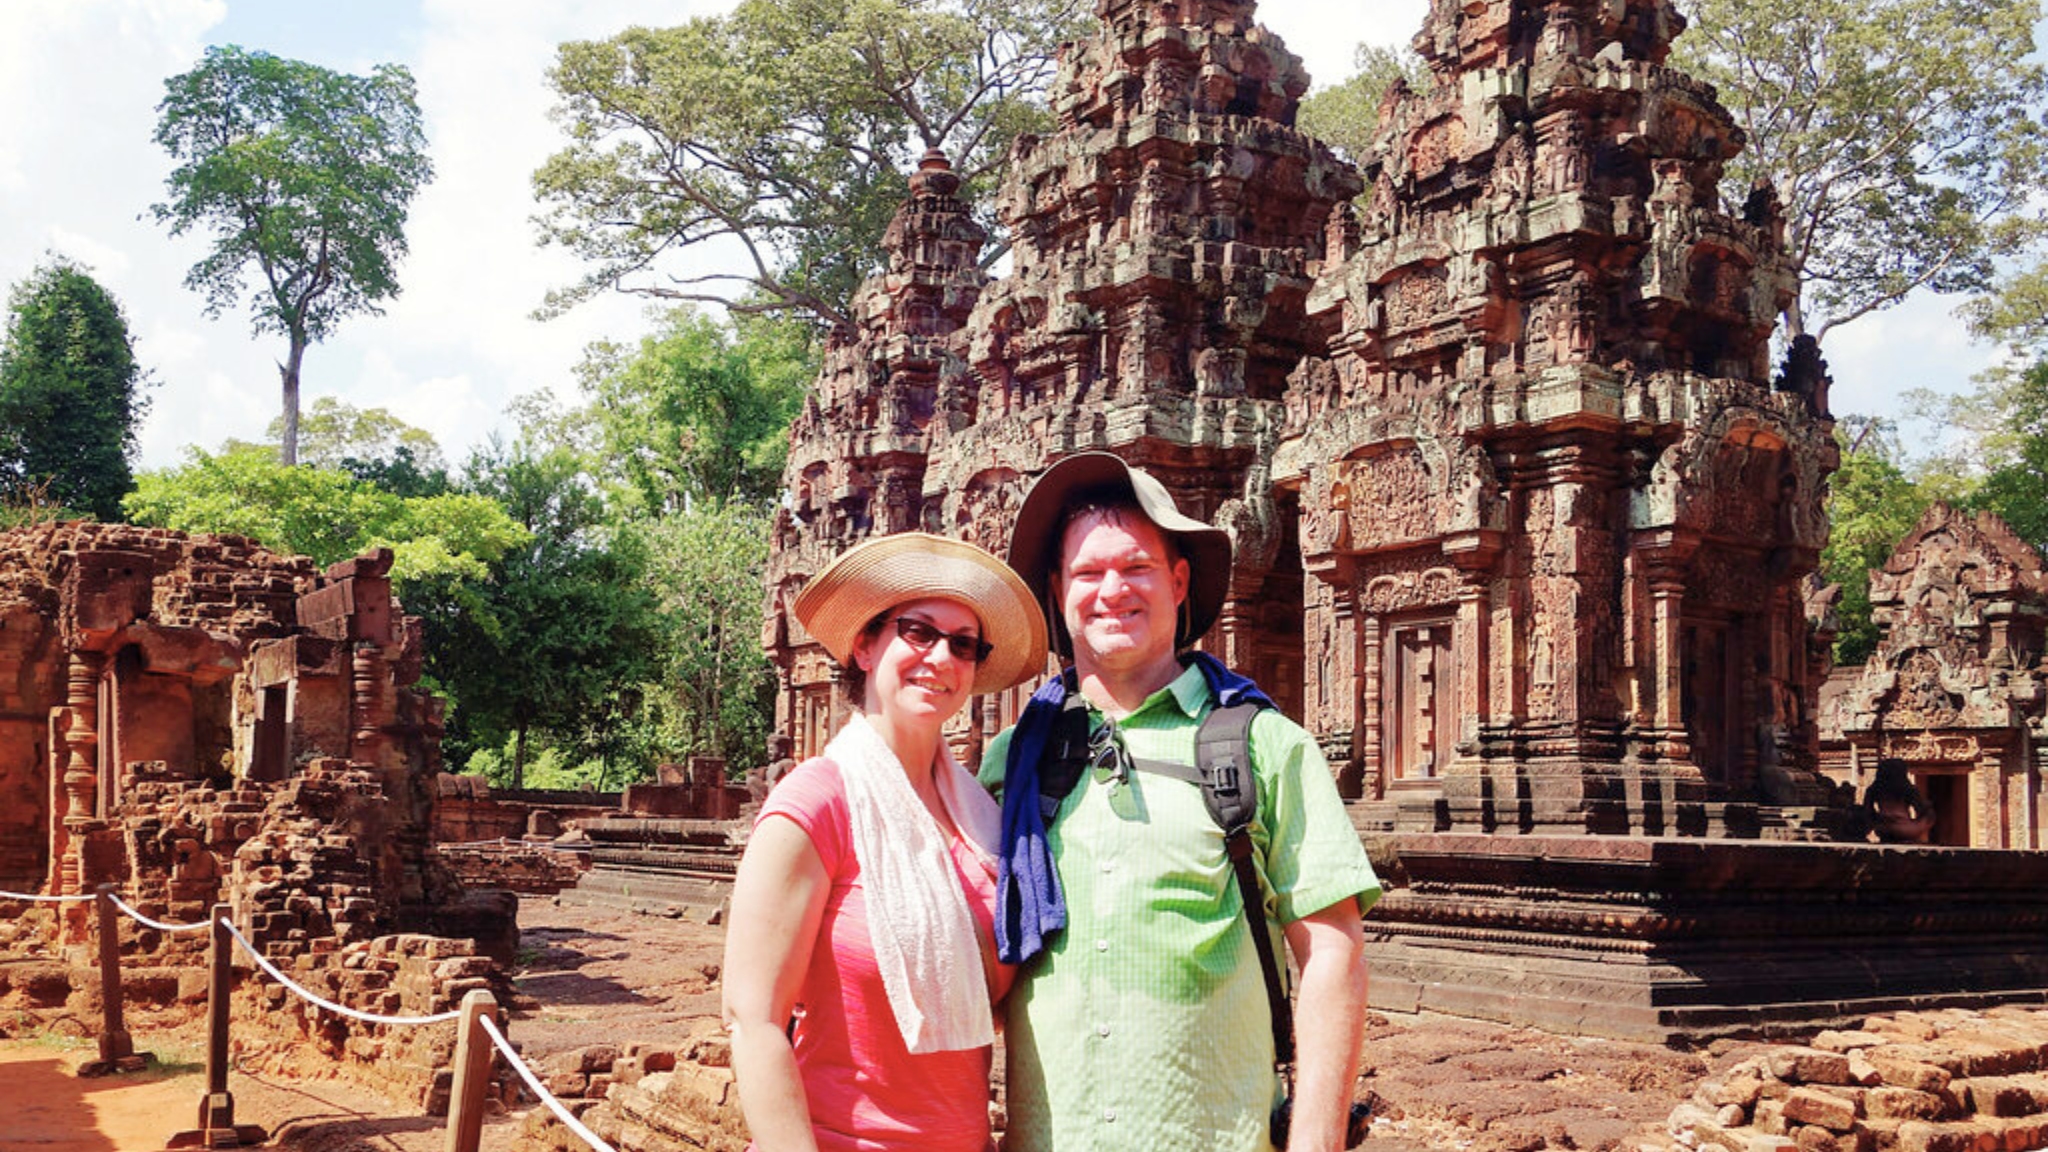 Day 12 Take Picture In The Magnificent Banteay Srei